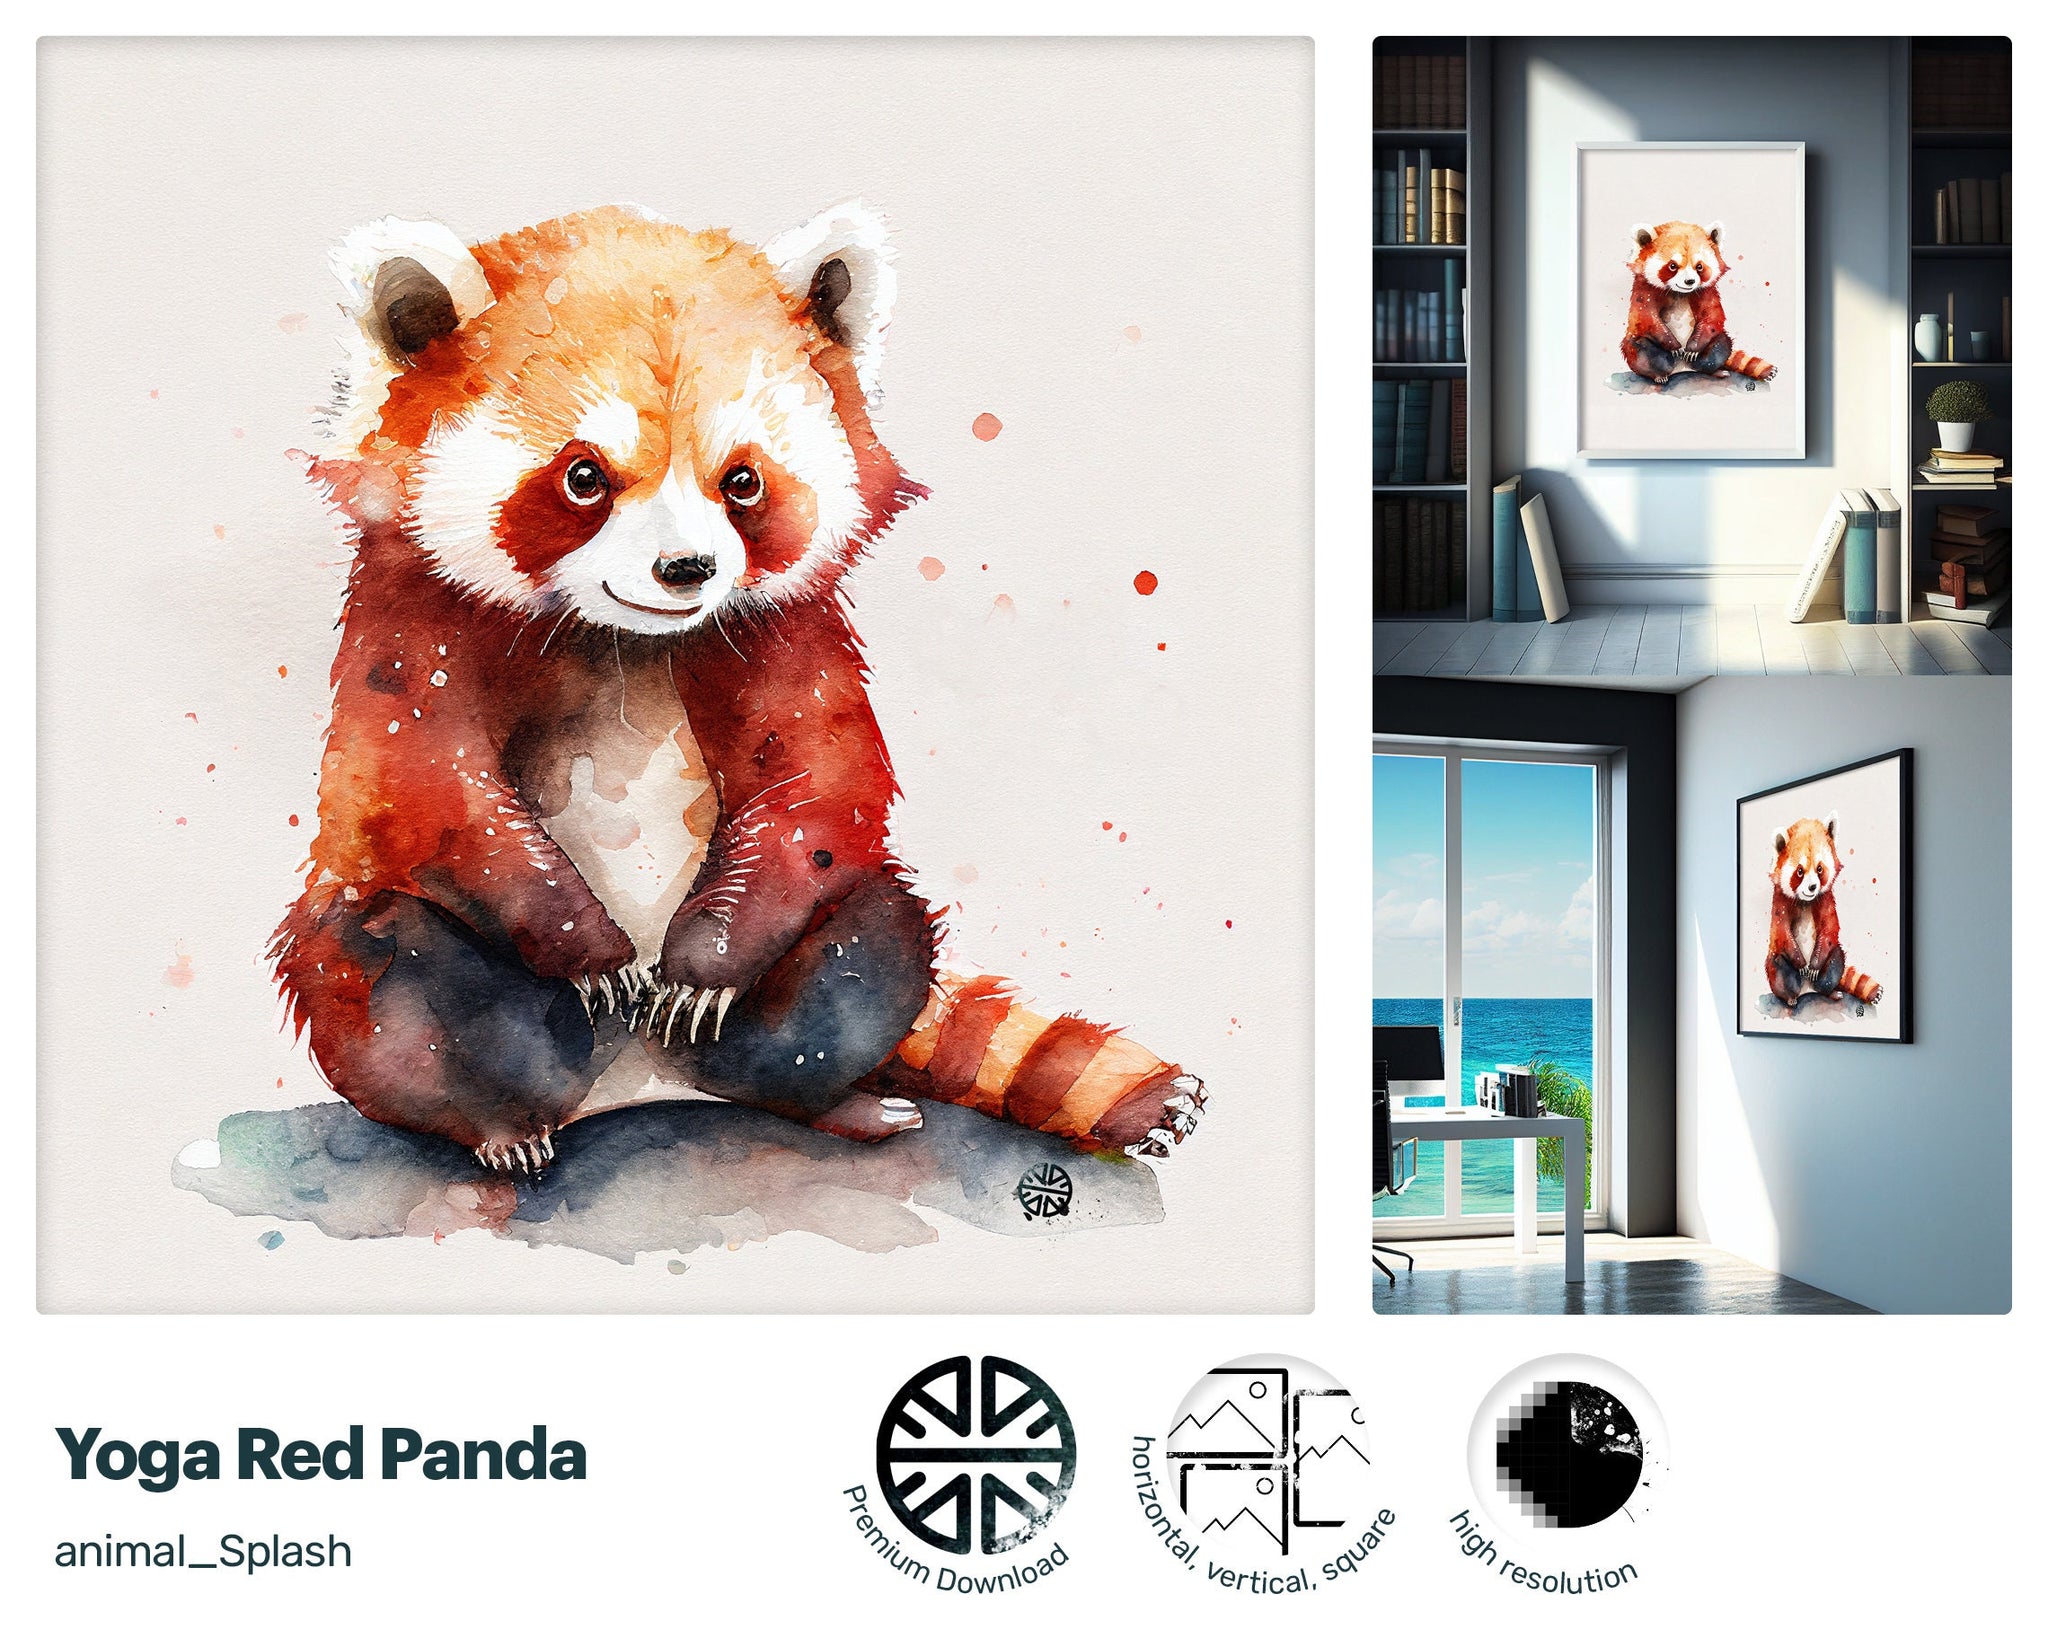 Calm Vogue Yoga Red Panda, Zany Fun Art, Cheerful Painted Intriguing Xclusive Lively Download